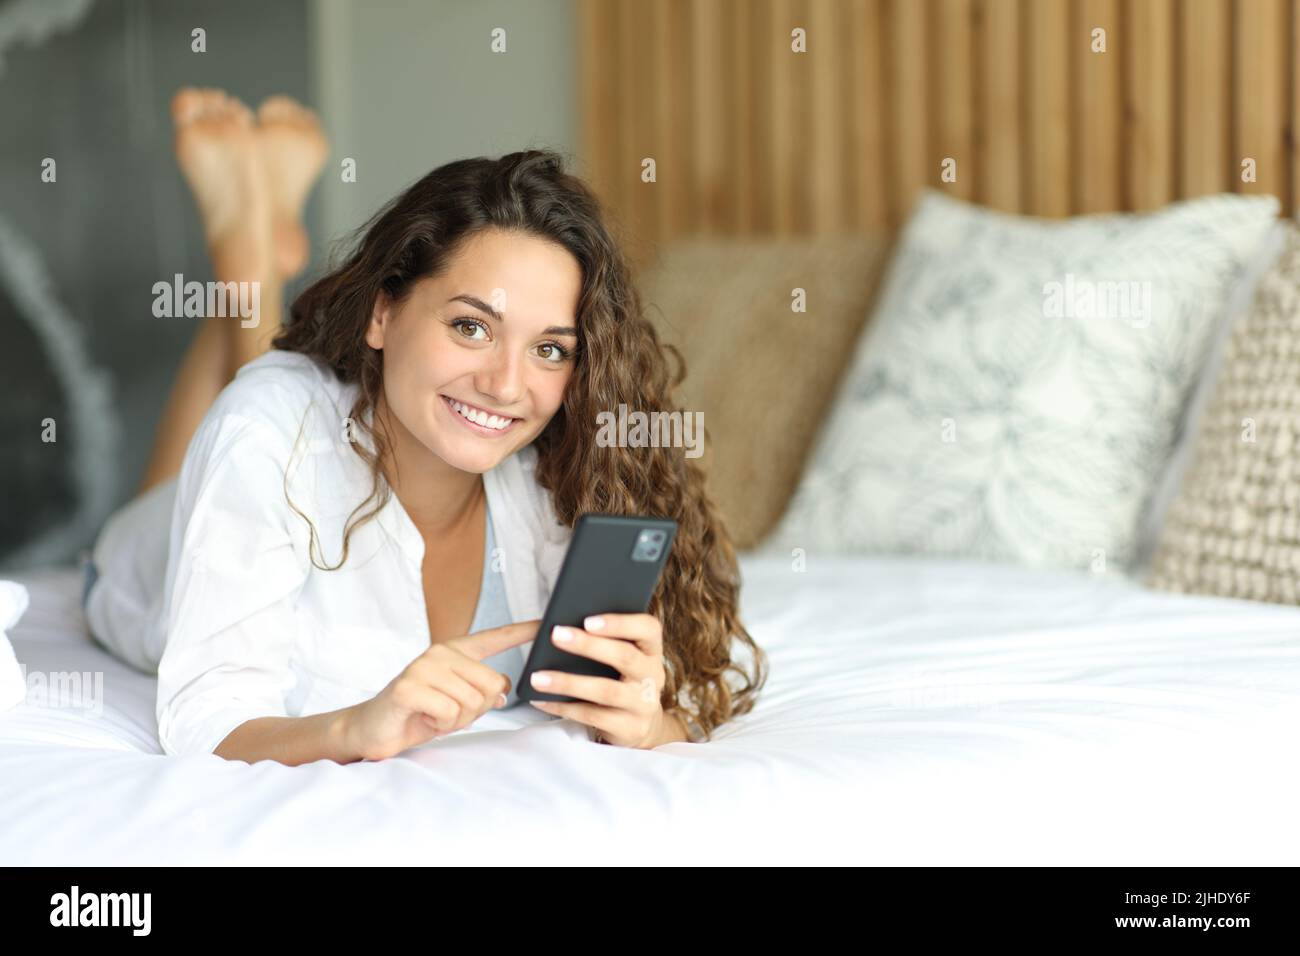 Happy woman holding smart phone looks at you lying on a bed Stock Photo